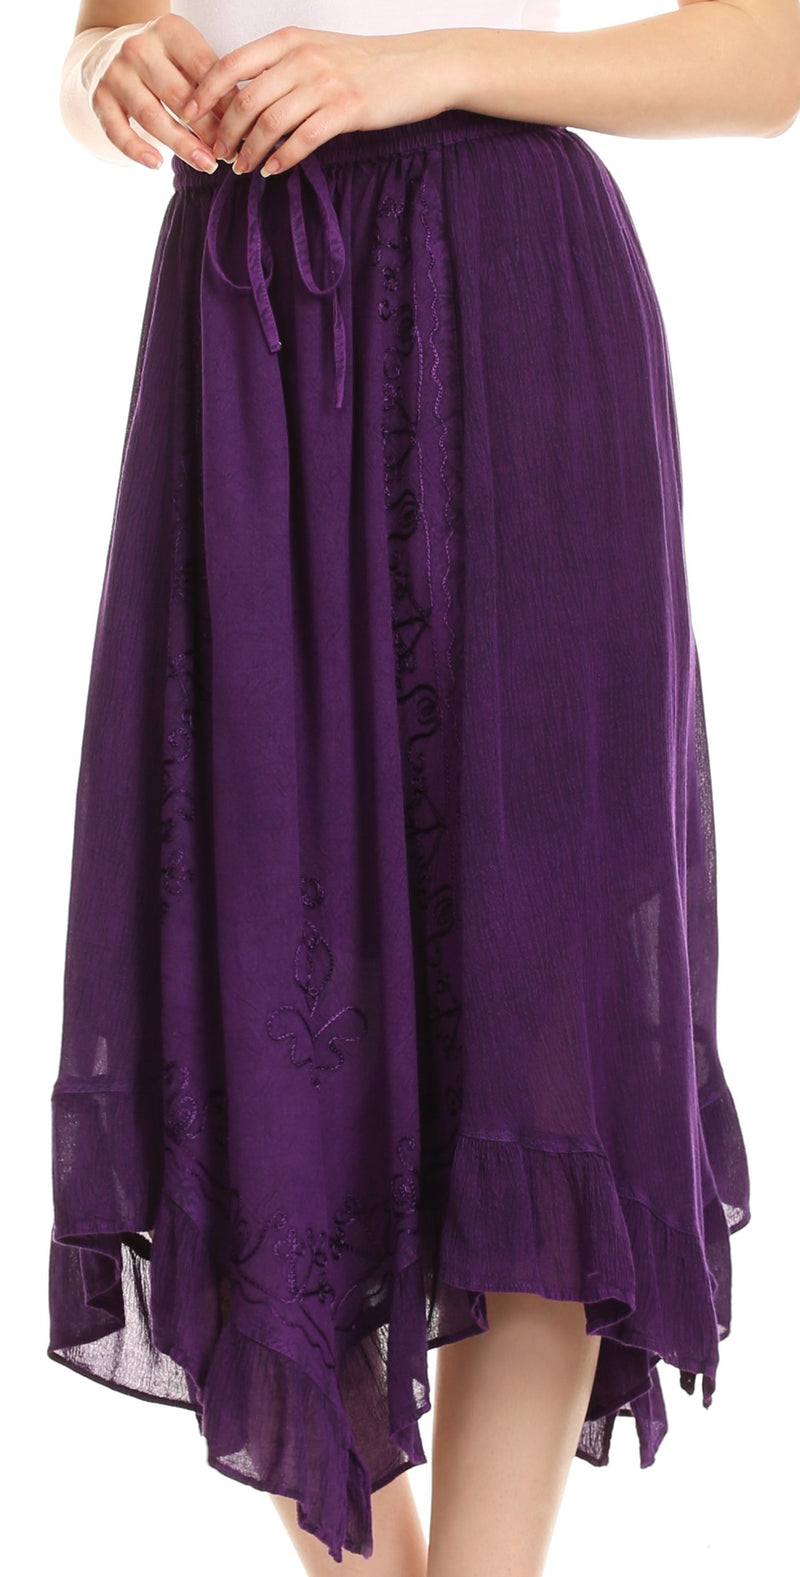 Sakkas Lucia Handkerchief Ruffled mid Length Casual Skirt with Embroidery